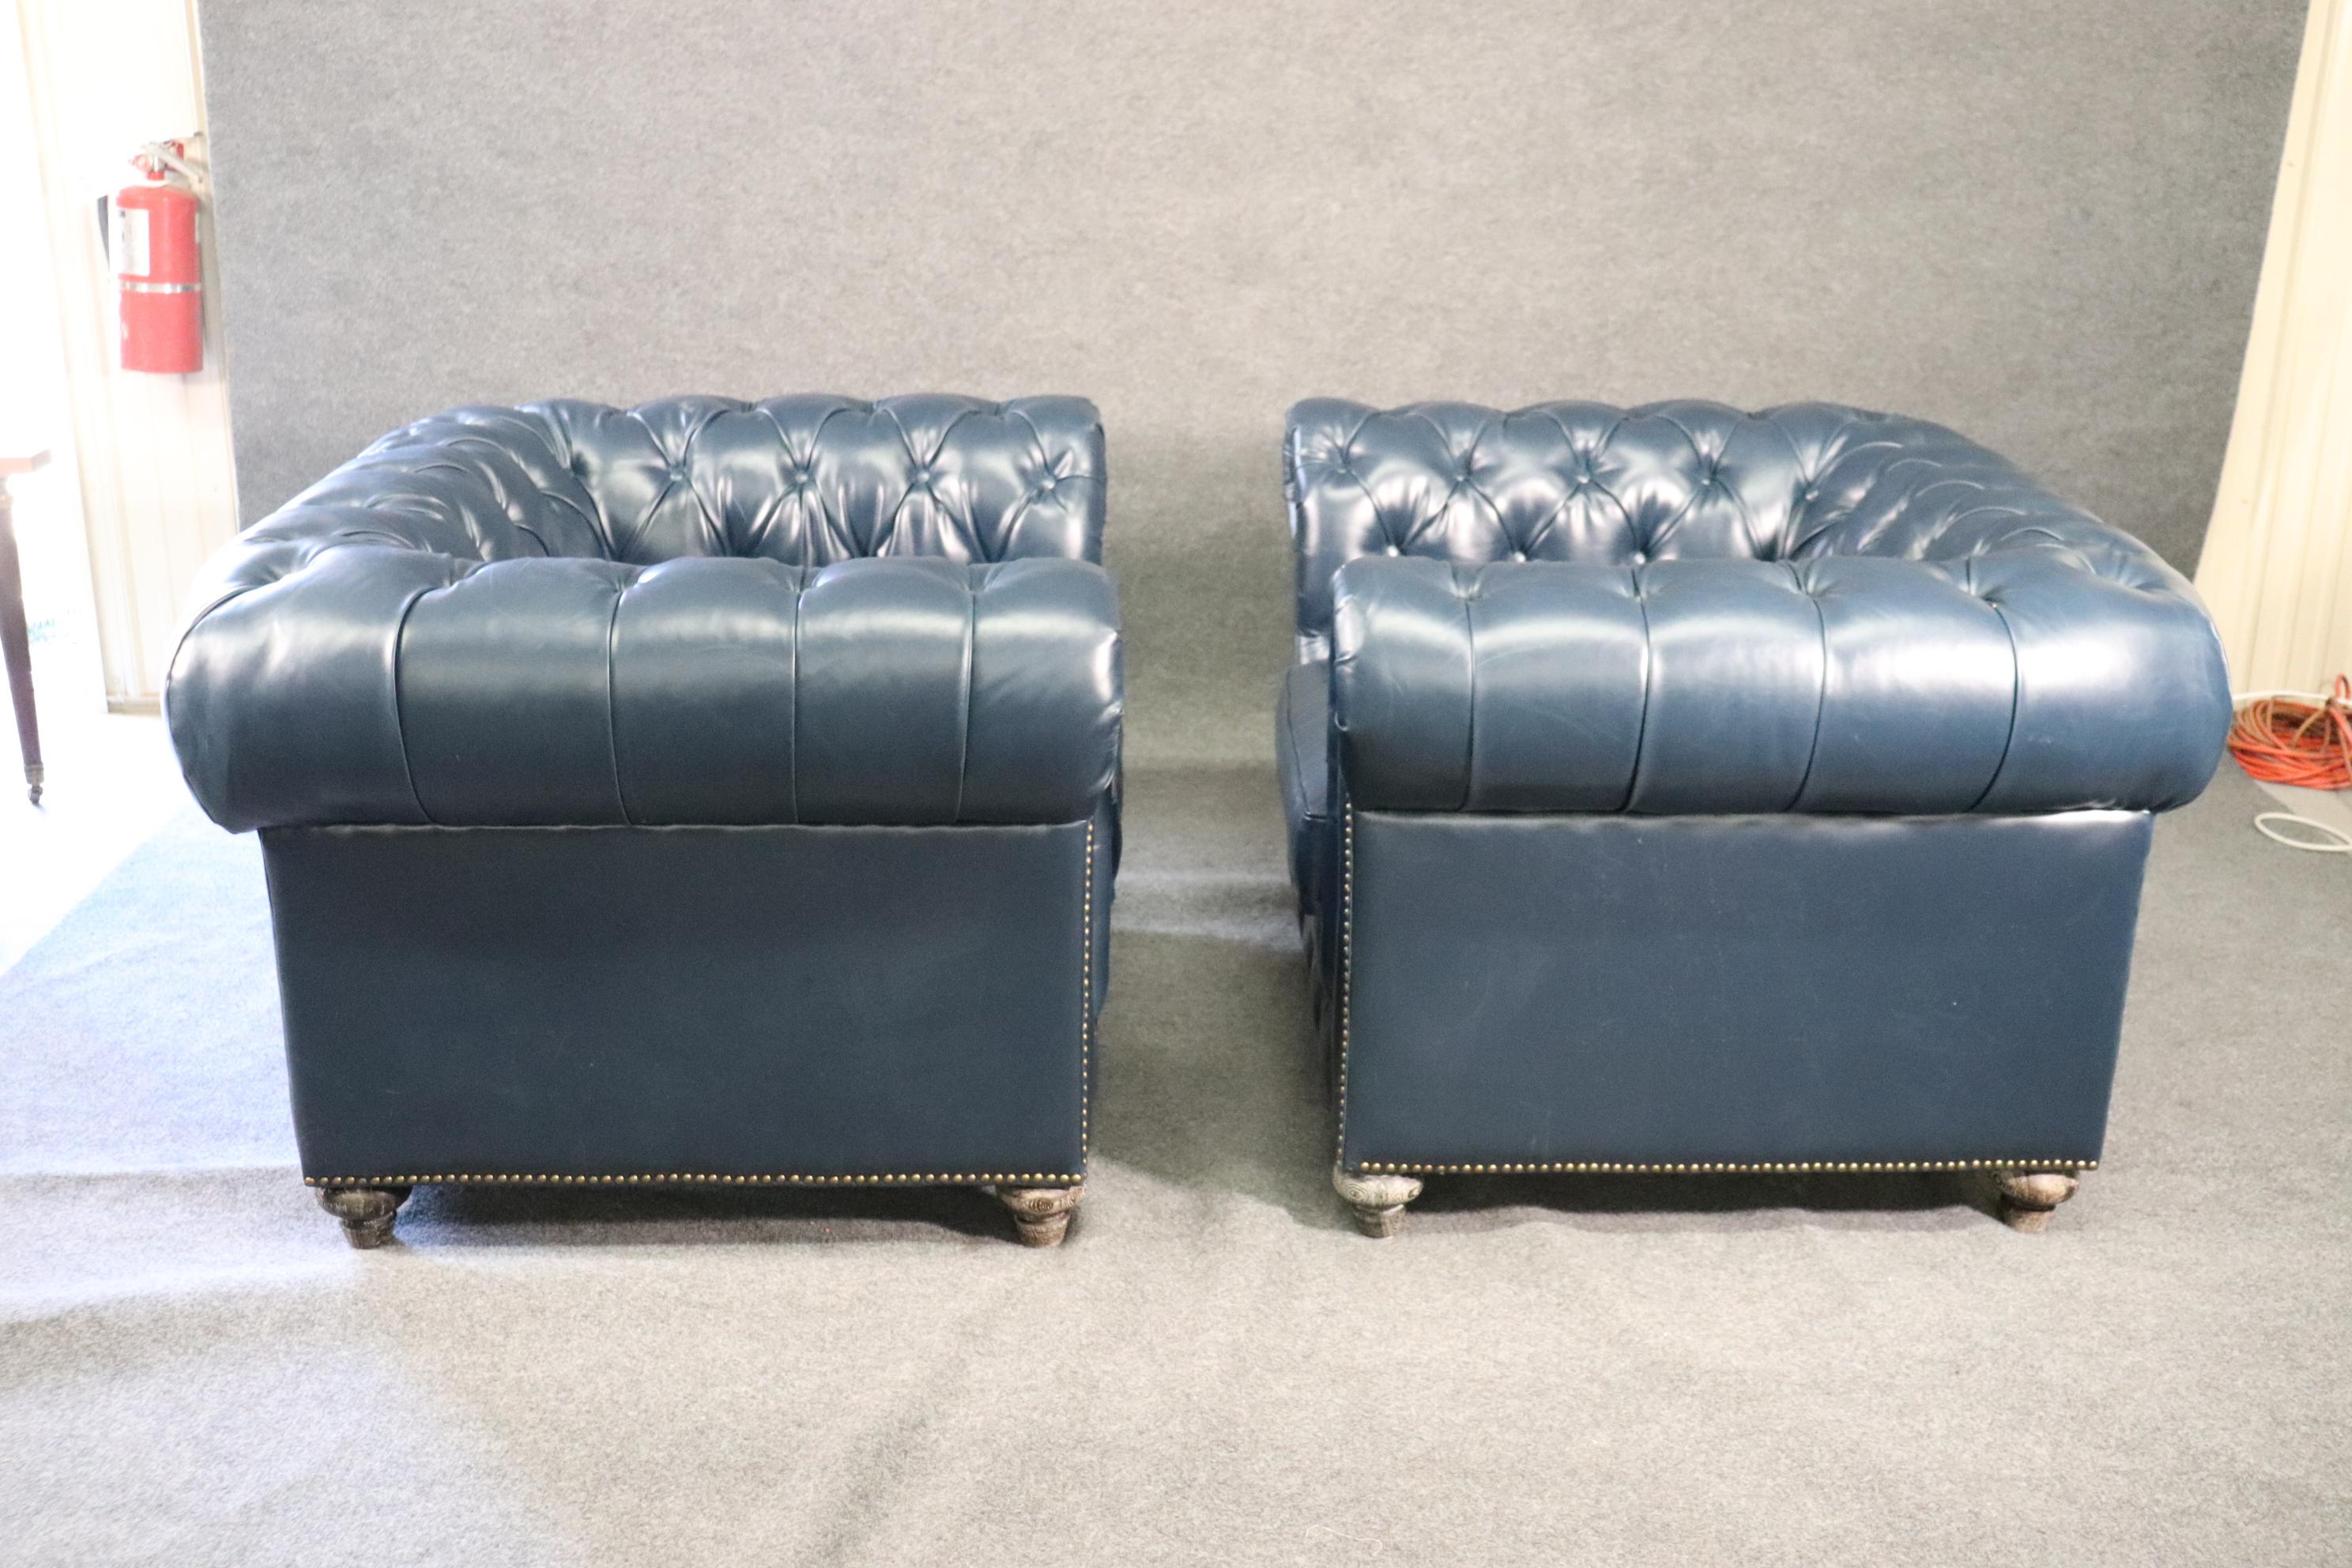 Pair High Quality Genuine Top Grain Leather Chesterfield Club Chairs Navy Blue 10